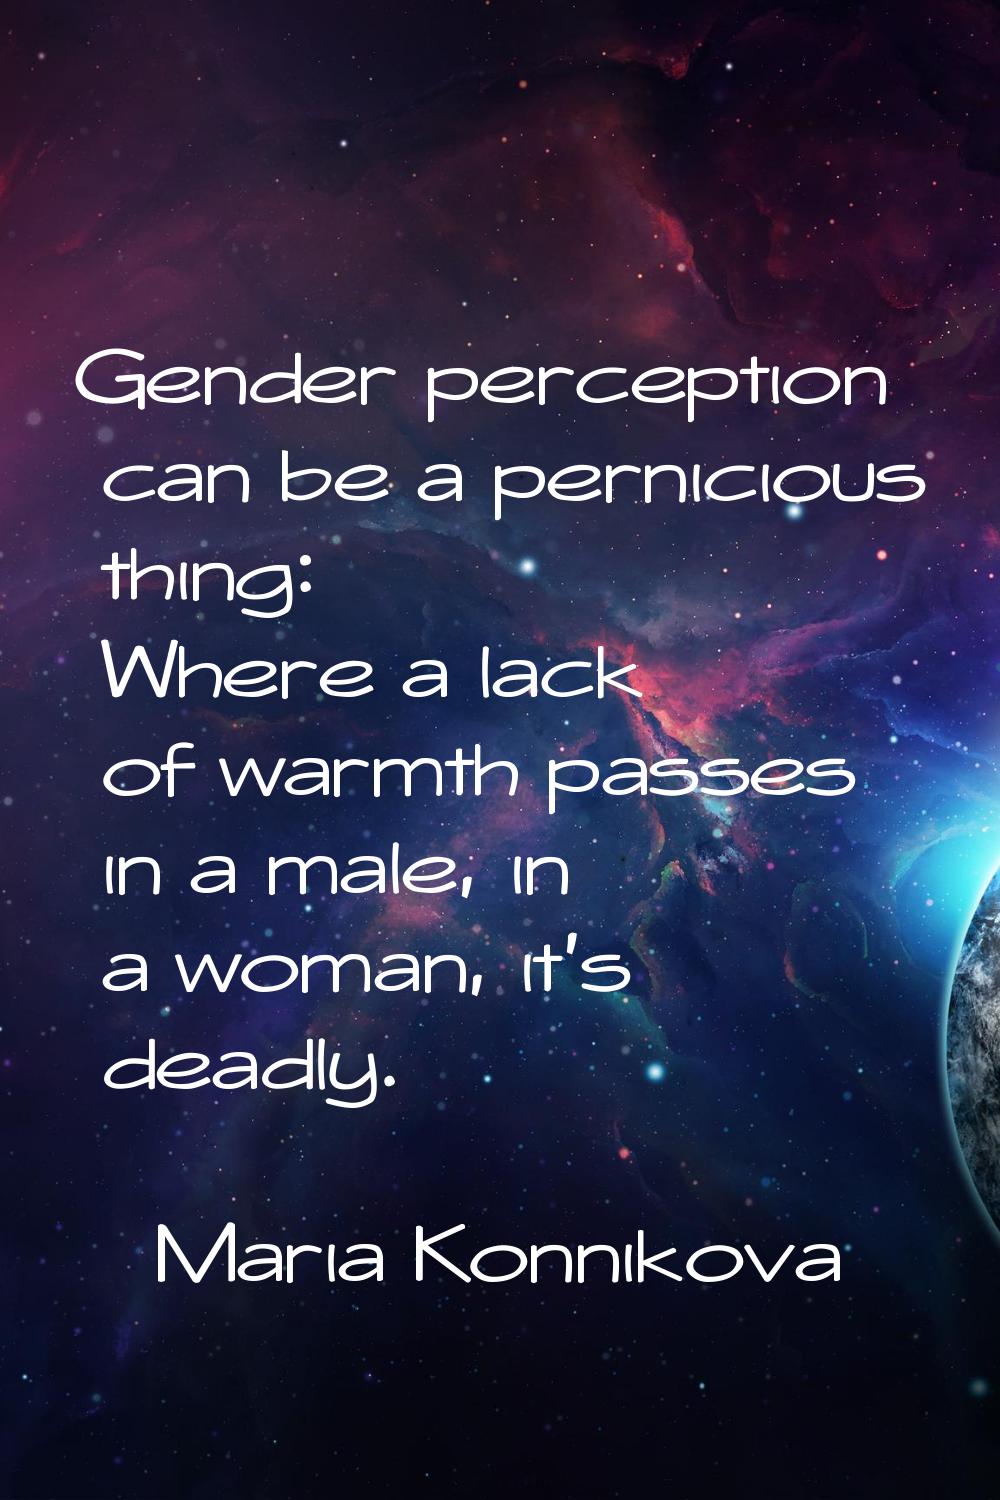 Gender perception can be a pernicious thing: Where a lack of warmth passes in a male, in a woman, i